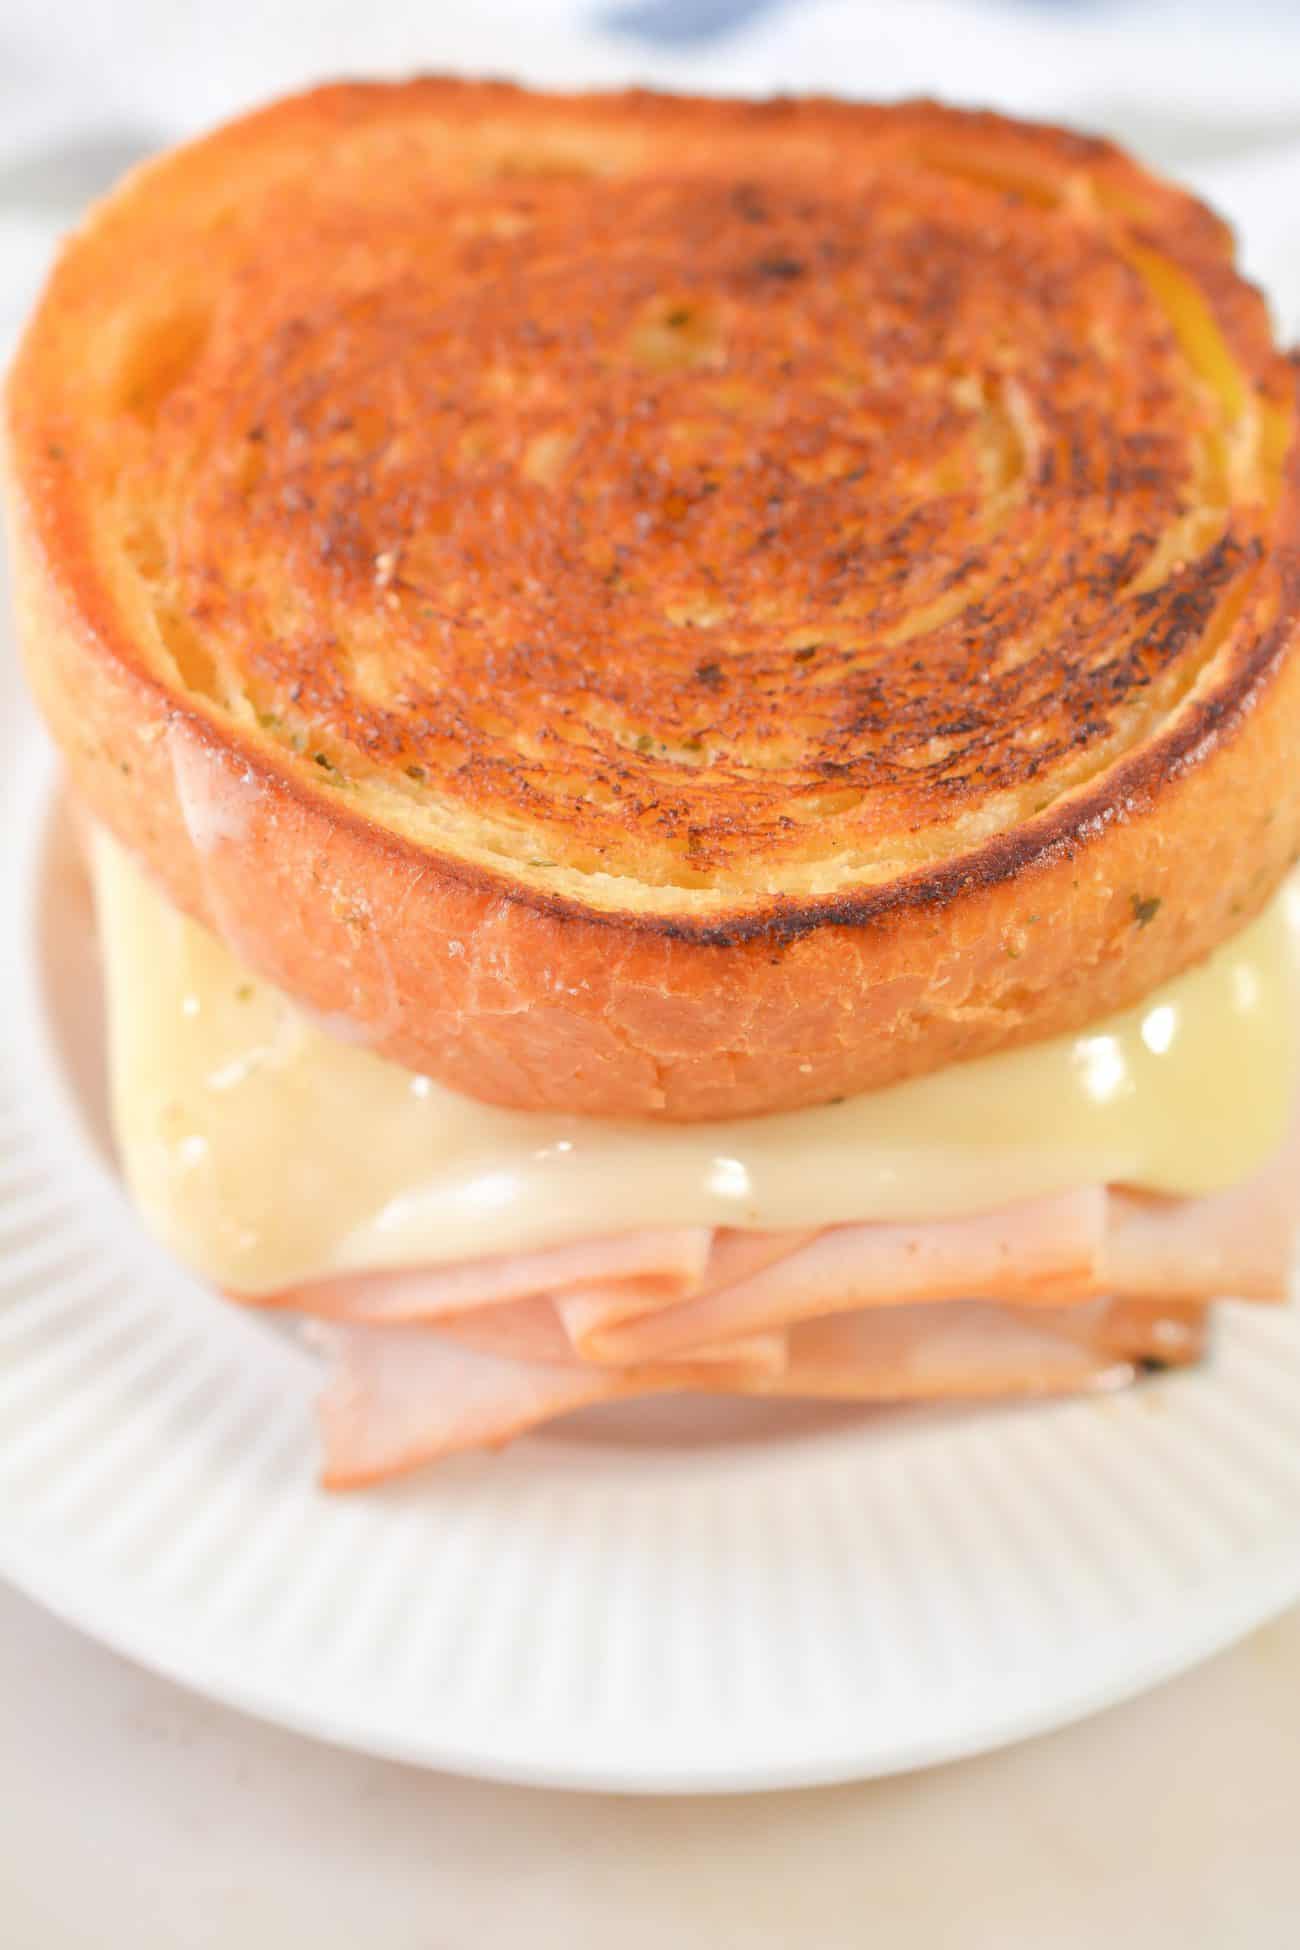 Grilled Turkey and Cheese Sandwich